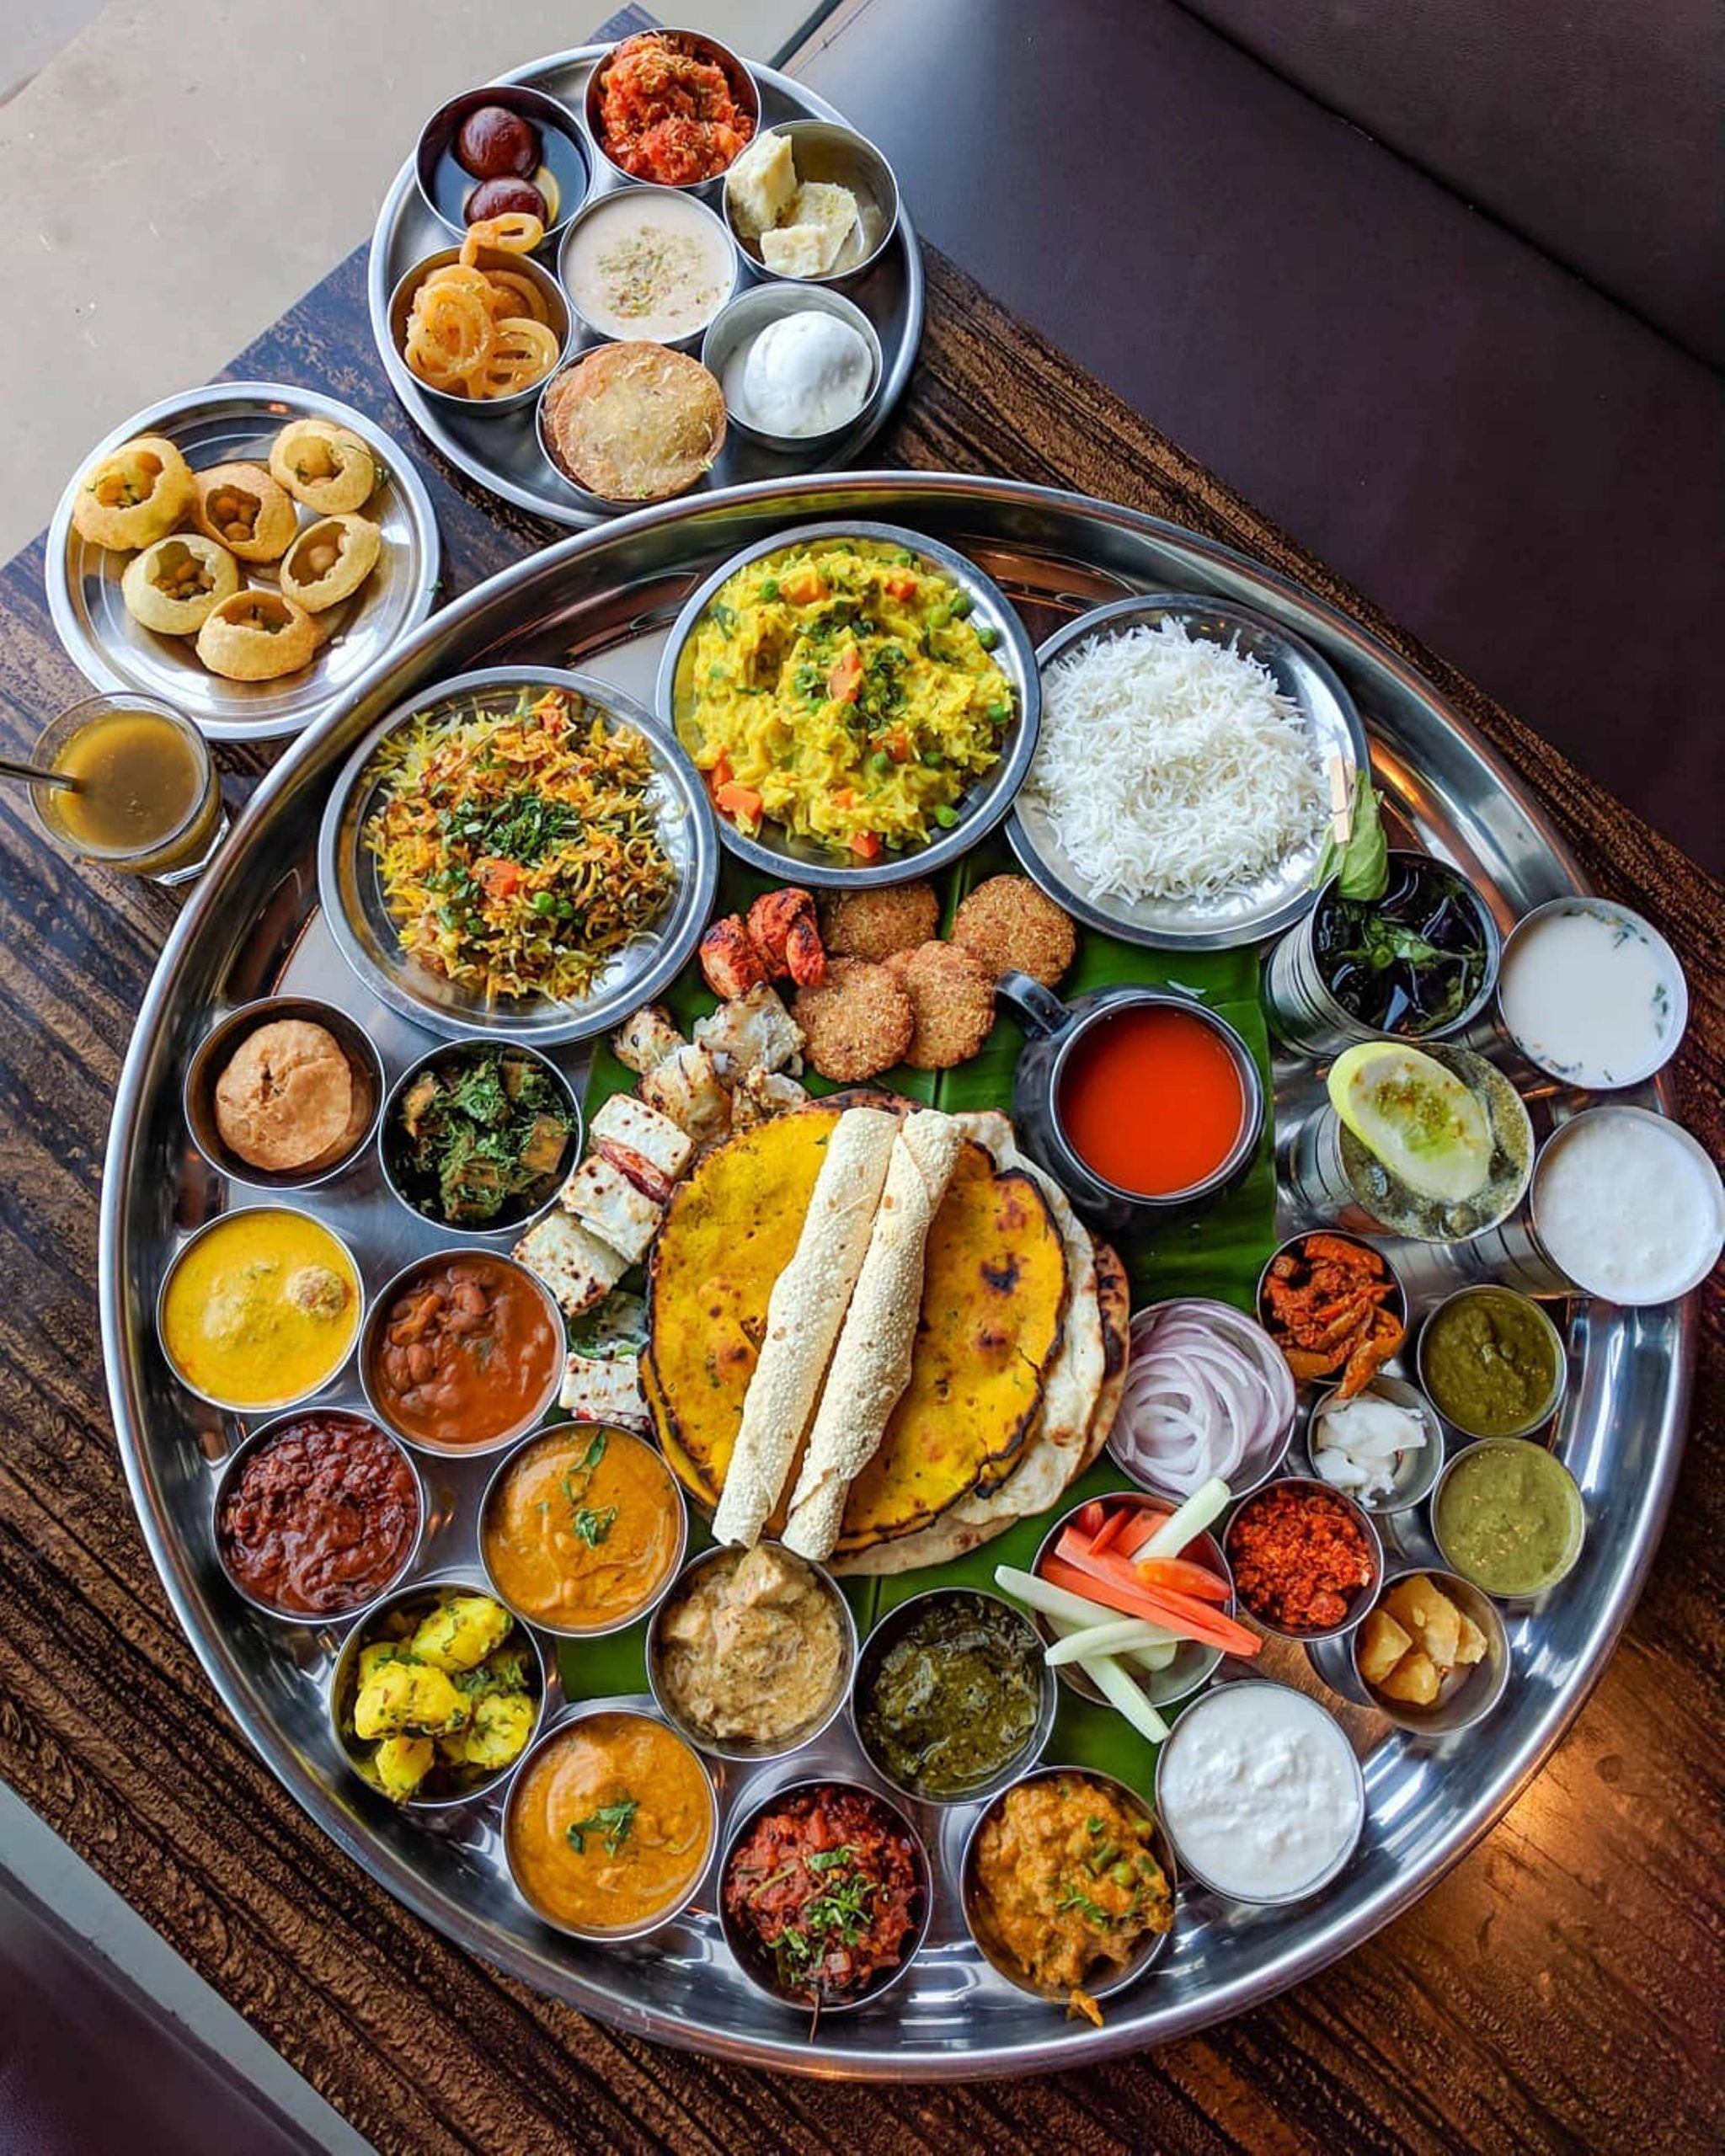 5 Of The Best Mumbais Brunch Boxes That You Must Try - NDTV Food